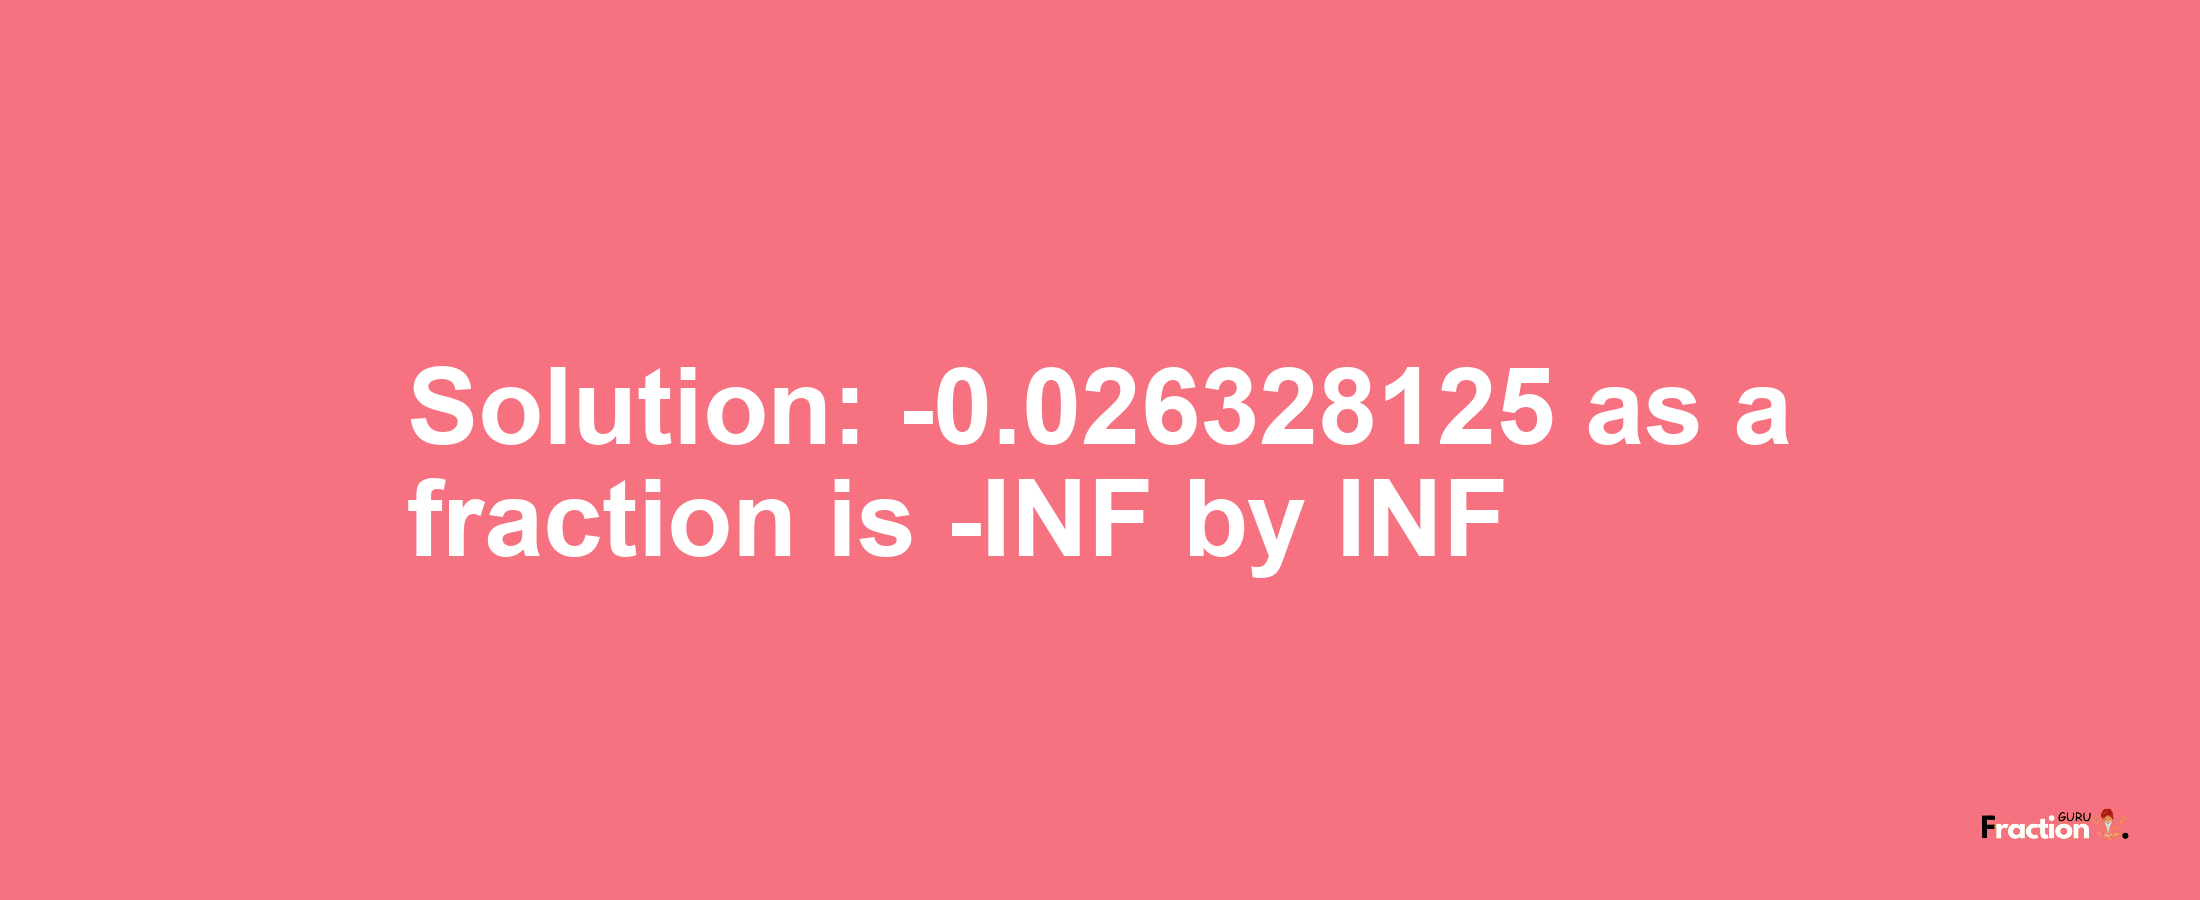 Solution:-0.026328125 as a fraction is -INF/INF